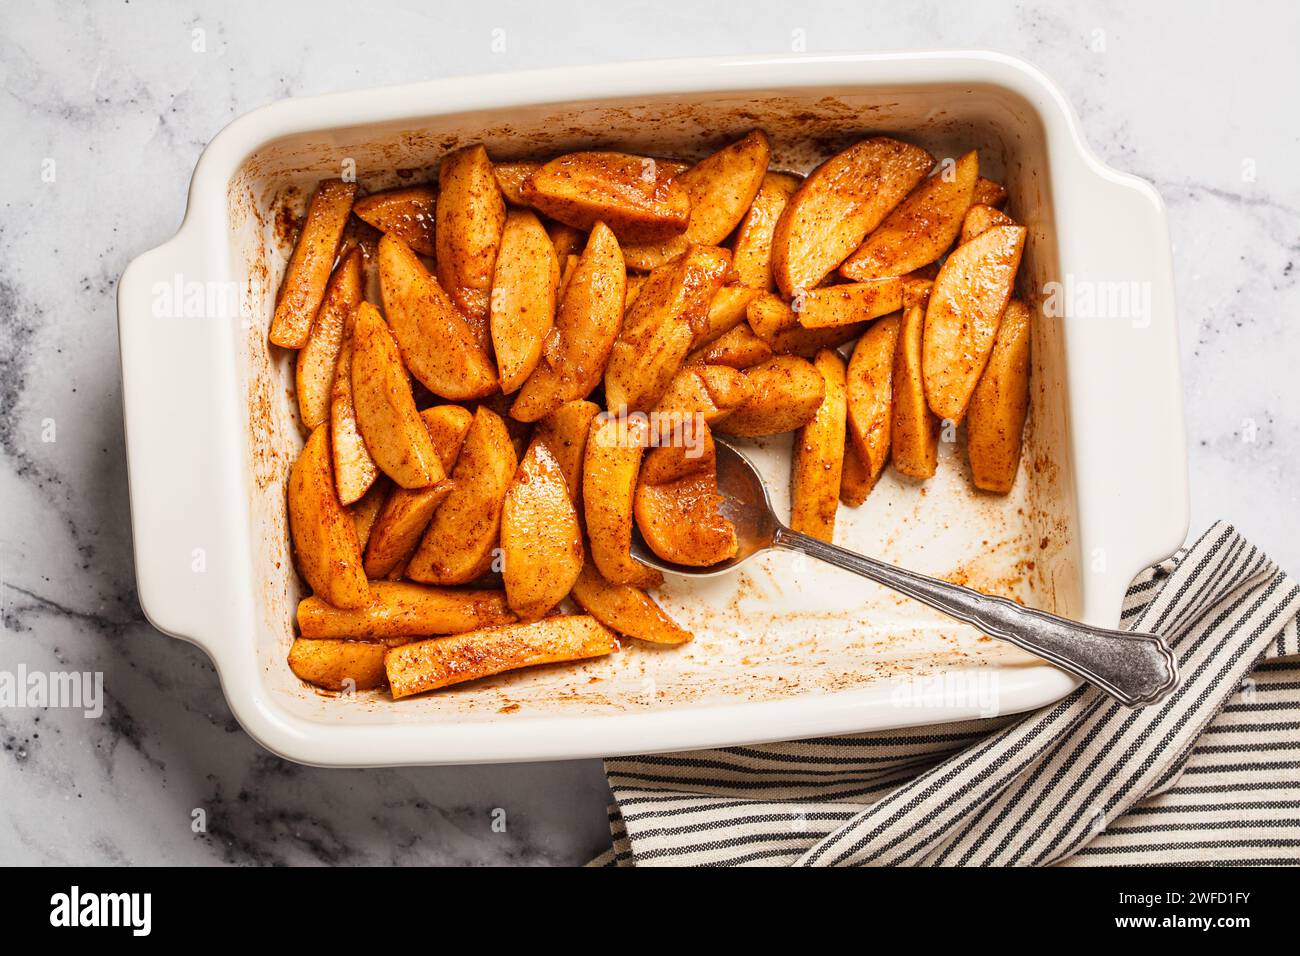 Baked apple slices with cinnamon and maple syrup in a white baking pan, top view. Stock Photo